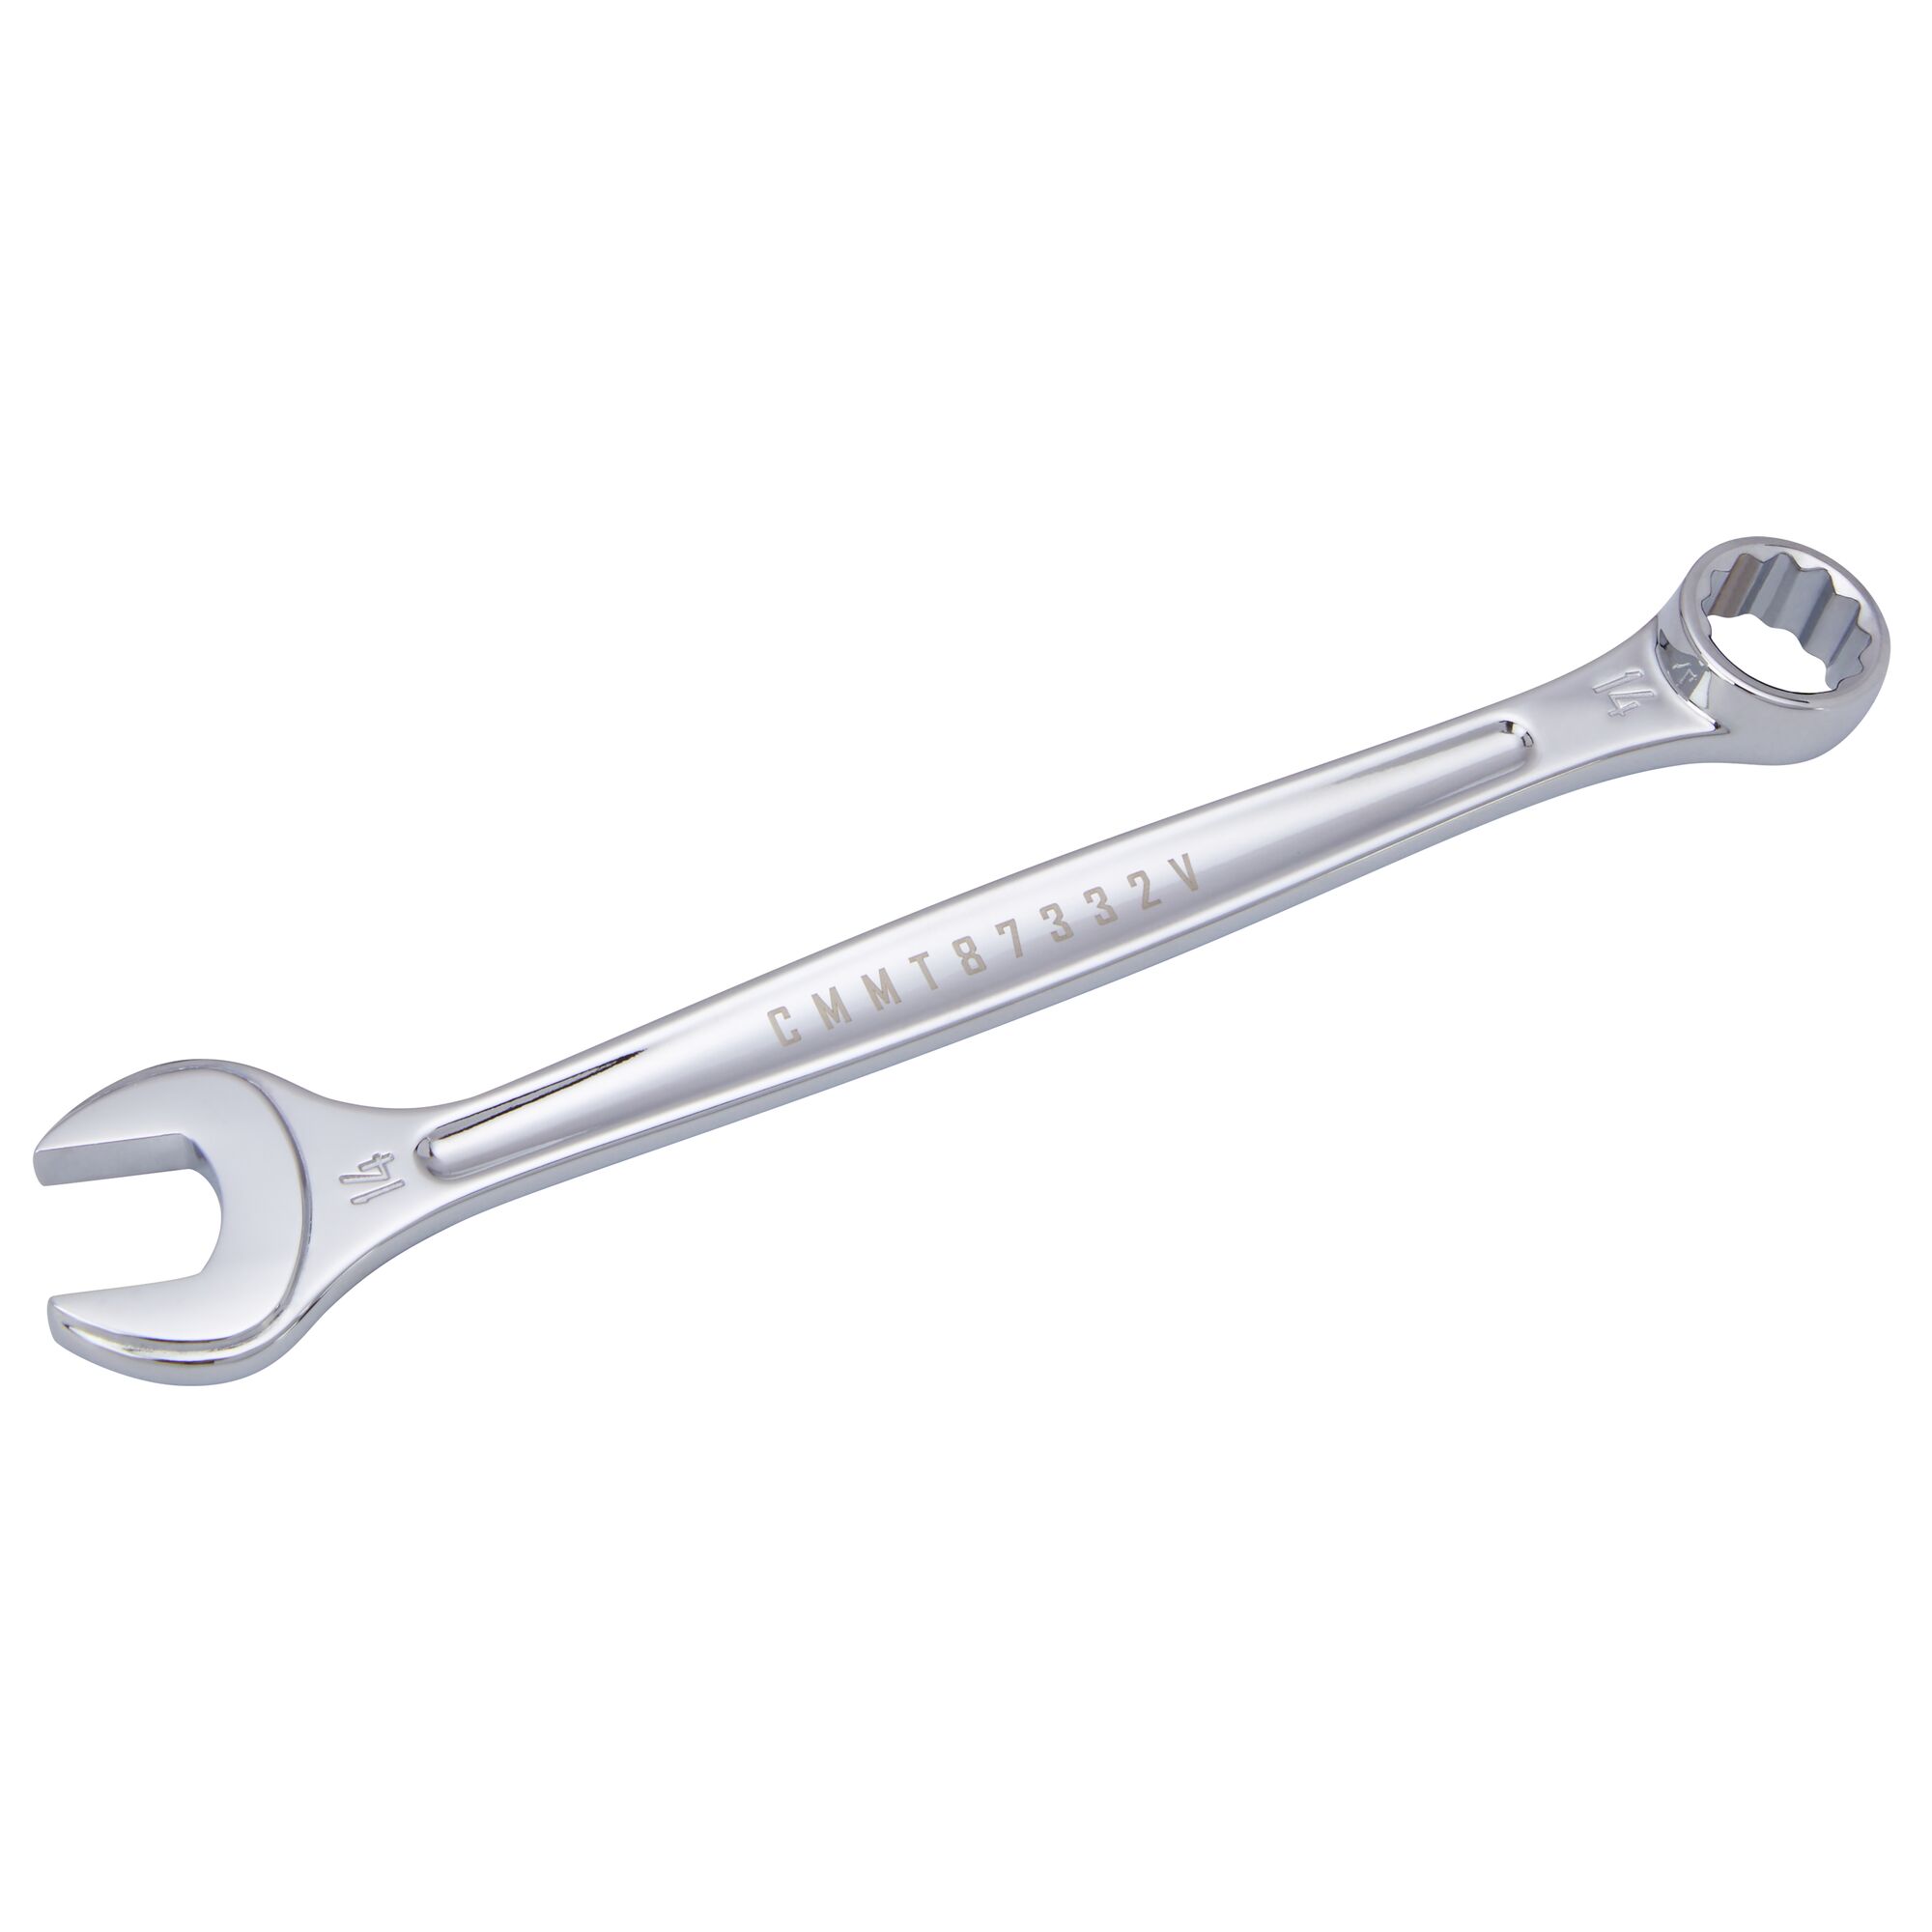 CRAFTSMAN V-SERIES Combo Wrench 14MM 